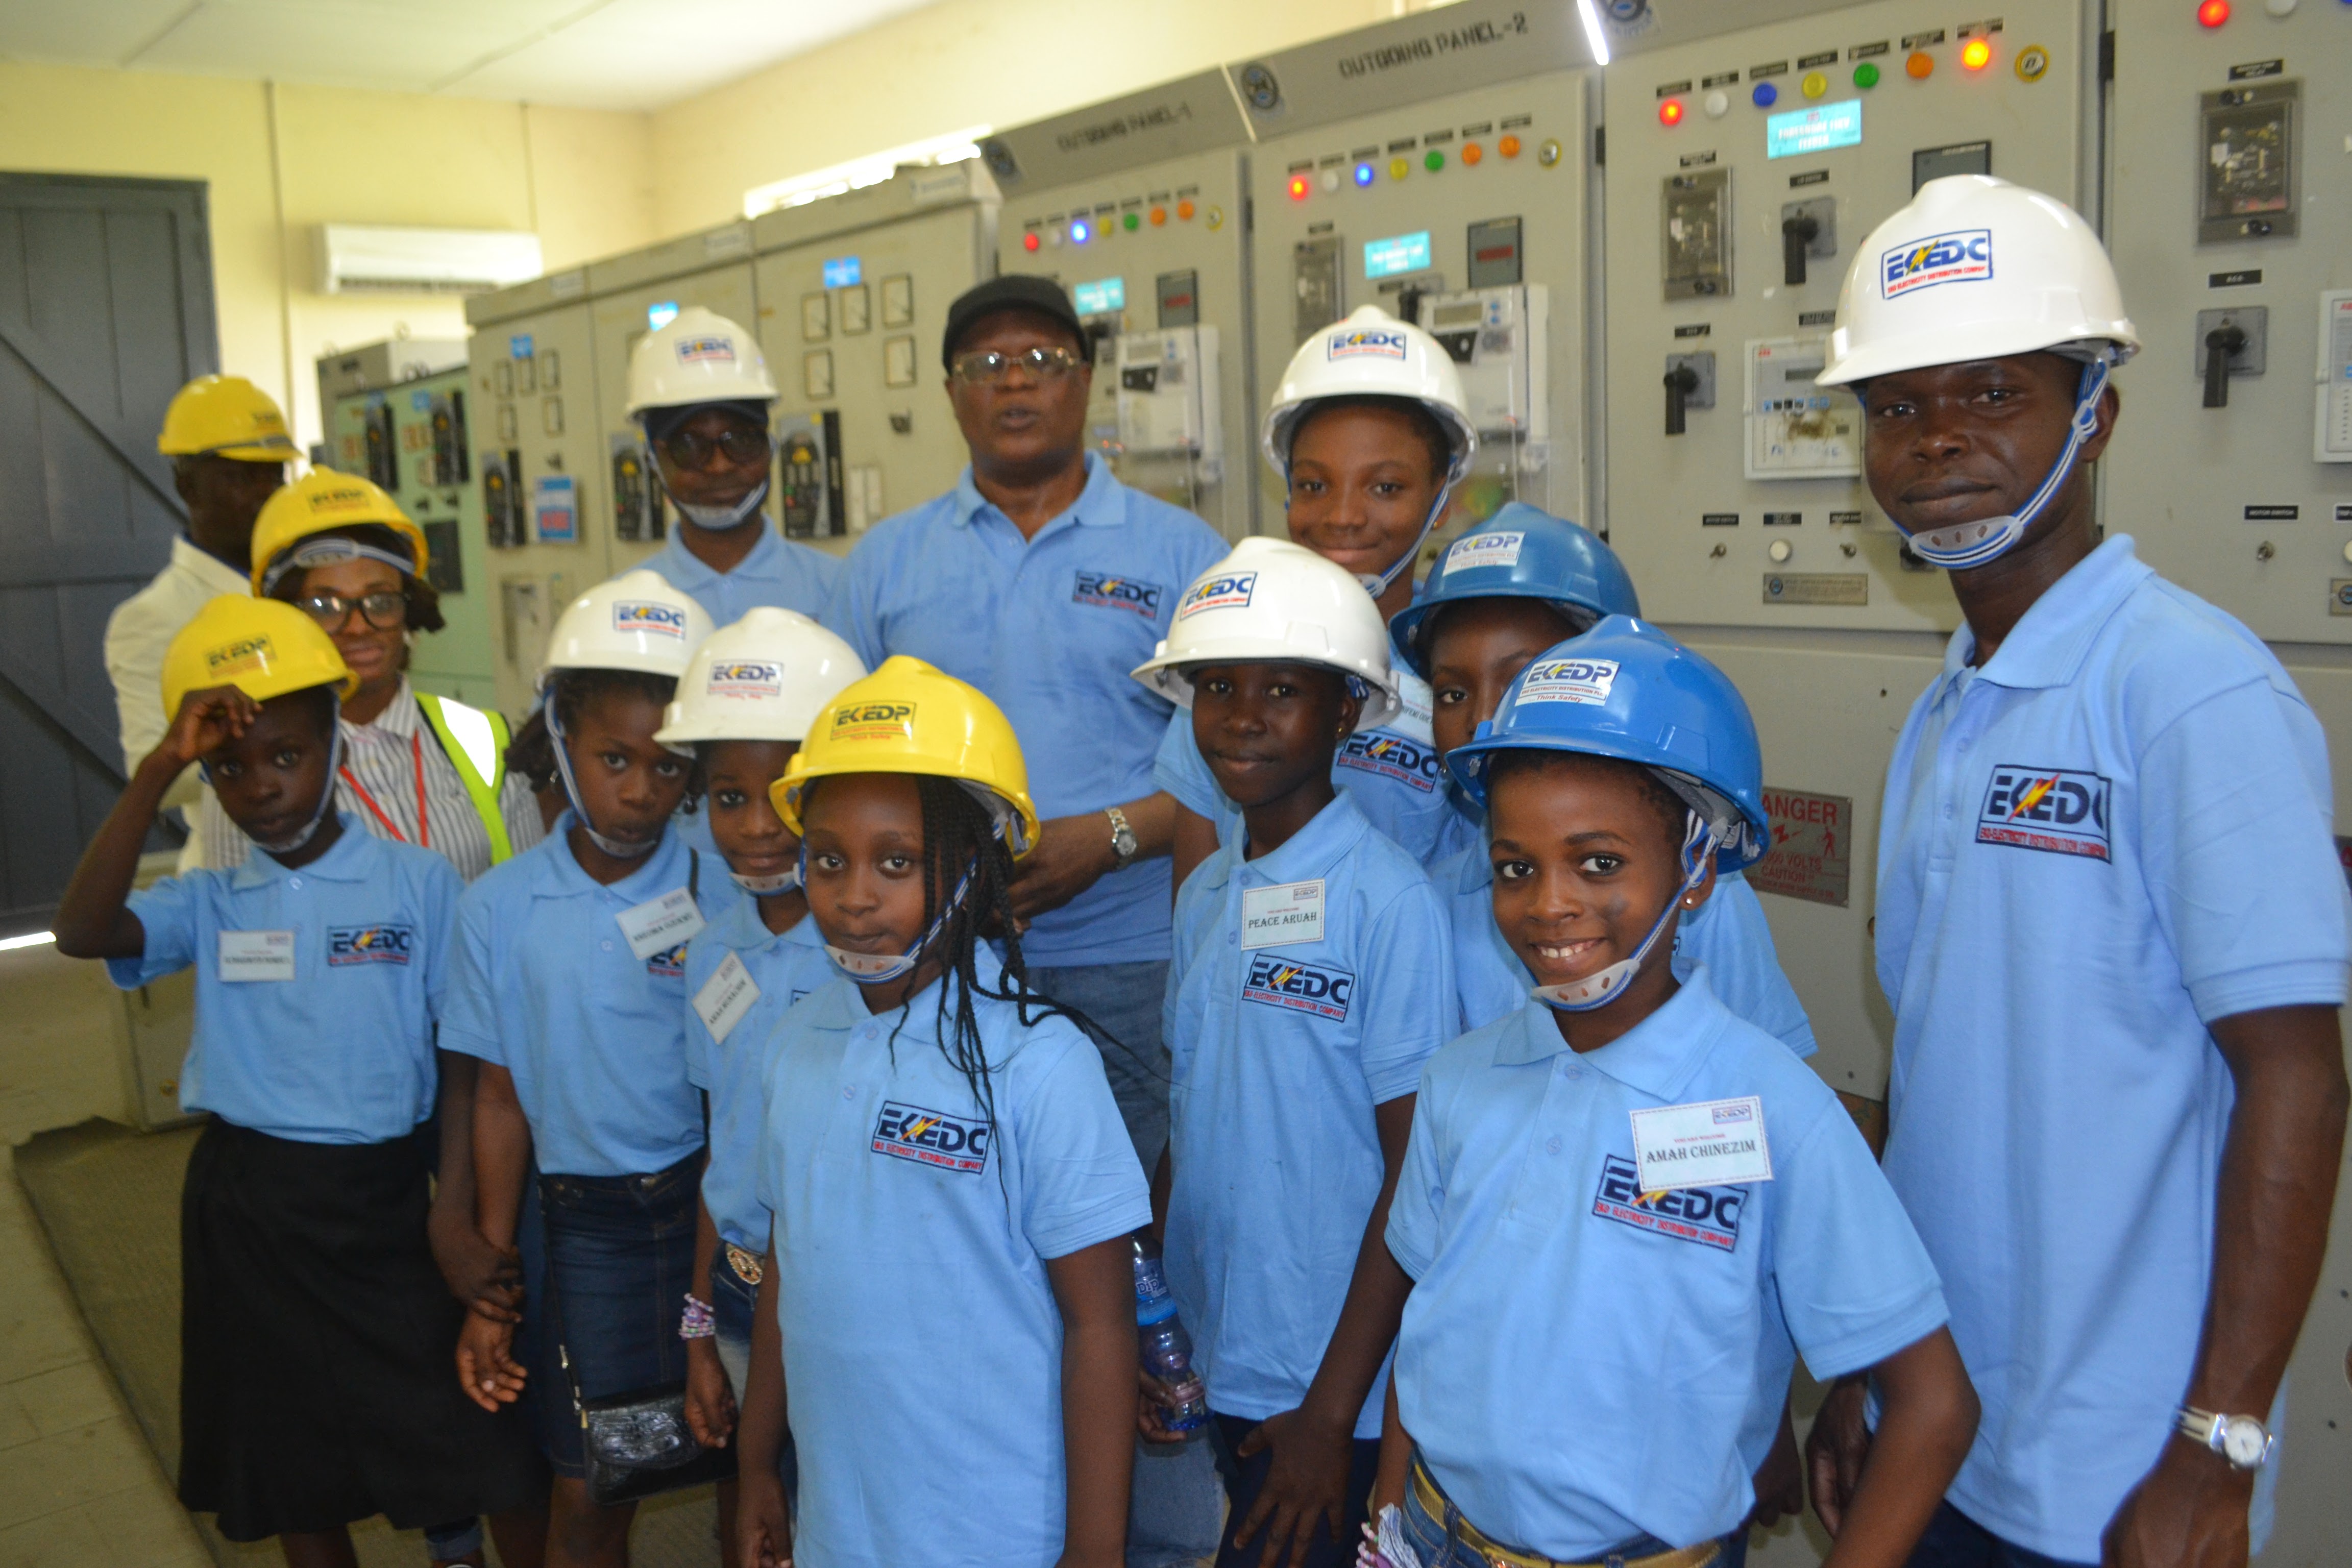 The Eko Electricity Distribution Company (EKEDC) in Nigeria held a Bring Your Daughter to Work Day event in July. 